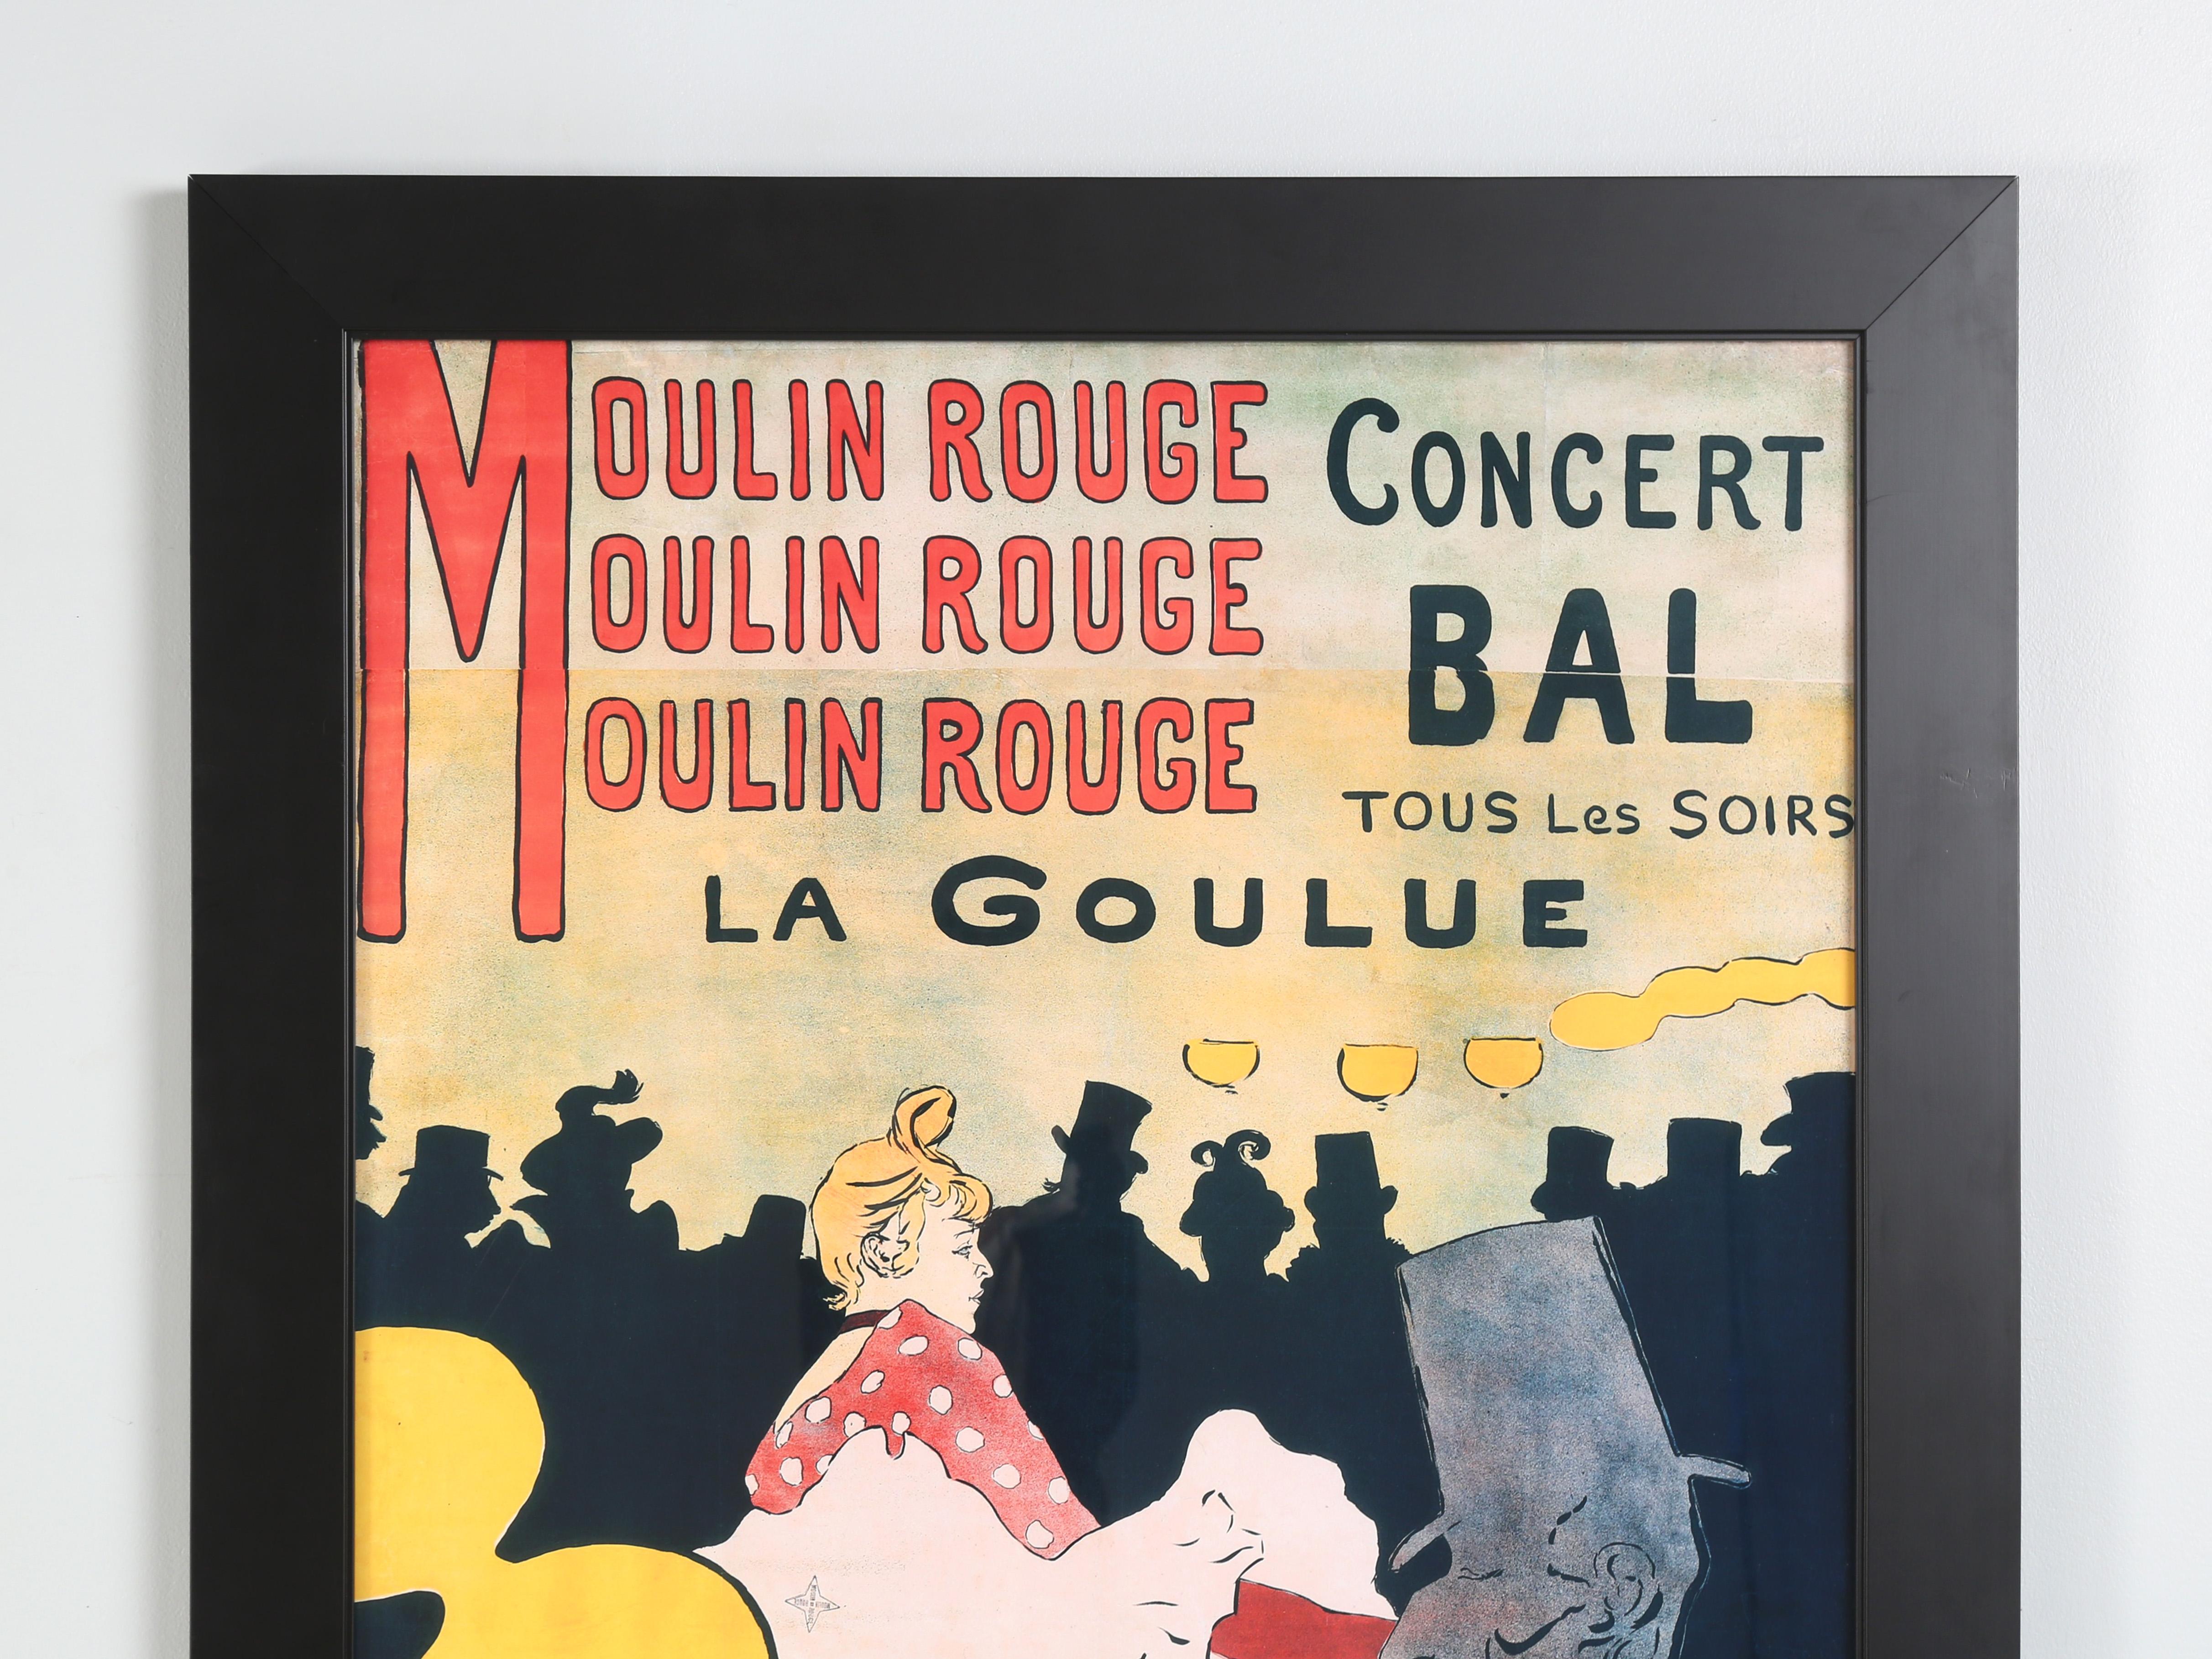 French Style Poster of the Moulin Rouge Concert Ball by Henri de Toulouse-Lautrec. Large format and nicely framed.
**Please note the bottom of the frame is chipped. There are also scuffs throughout, image 3.